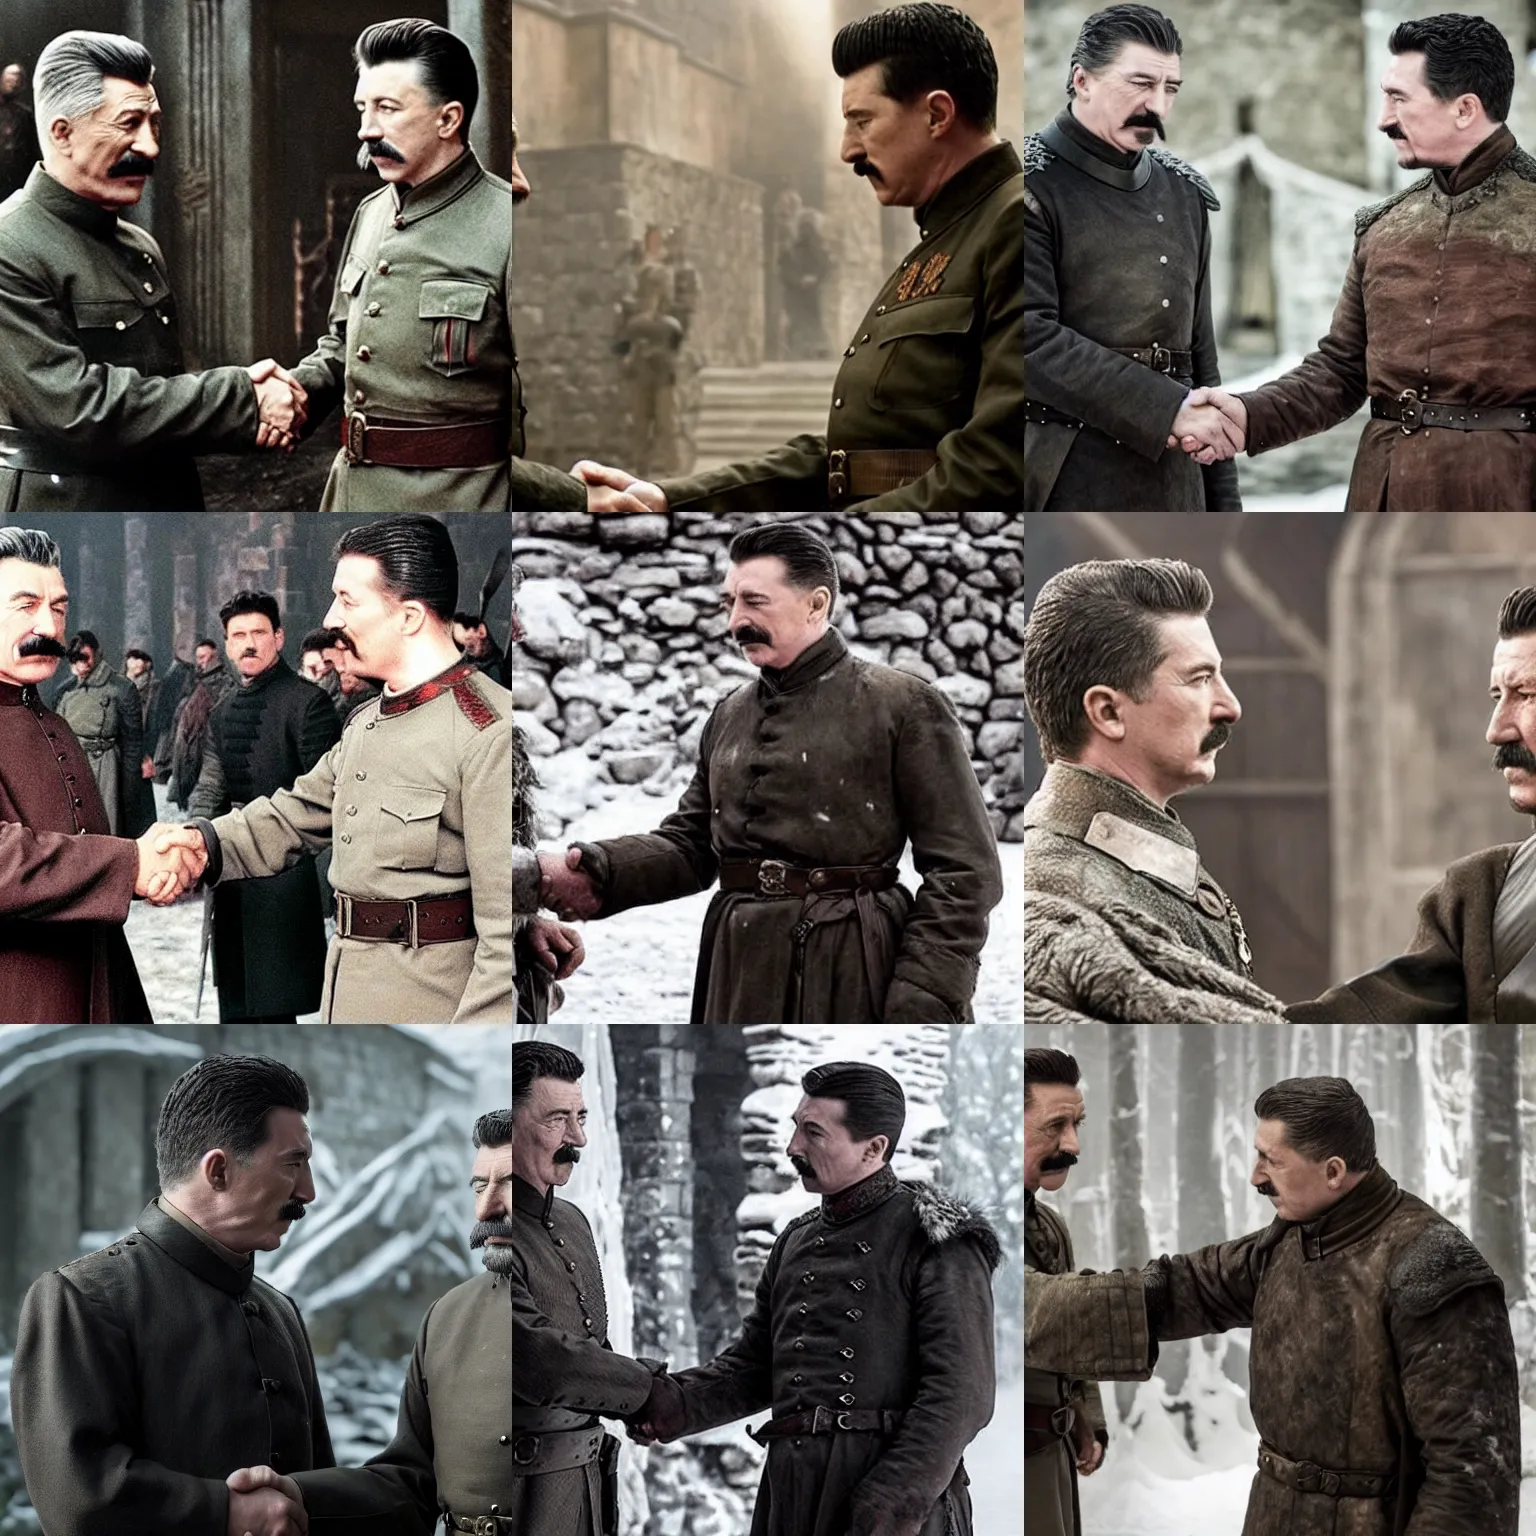 Prompt: Still of Joseph Stalin shaking hands with petyr baelish in Game of Thrones